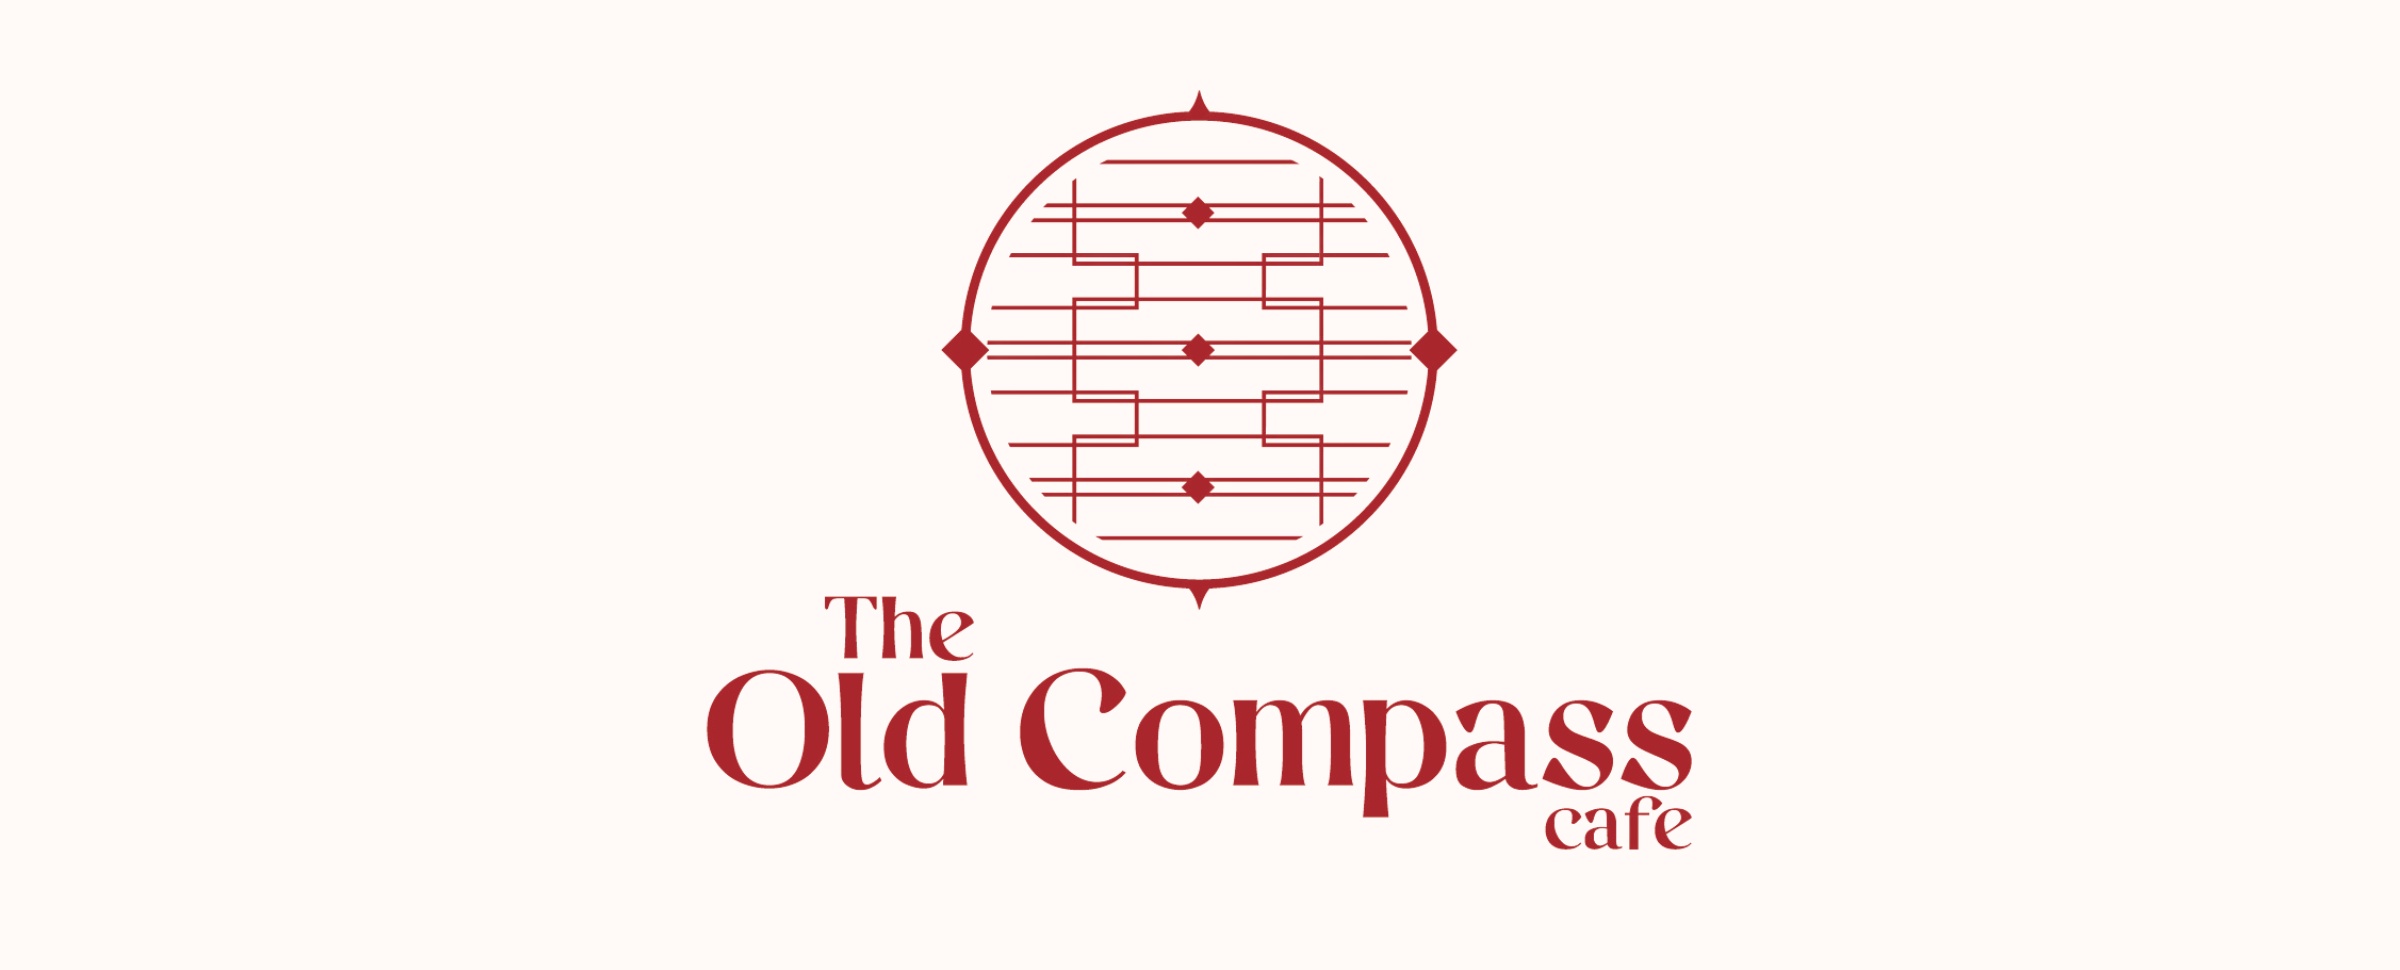 The Old Compass Cafe logo